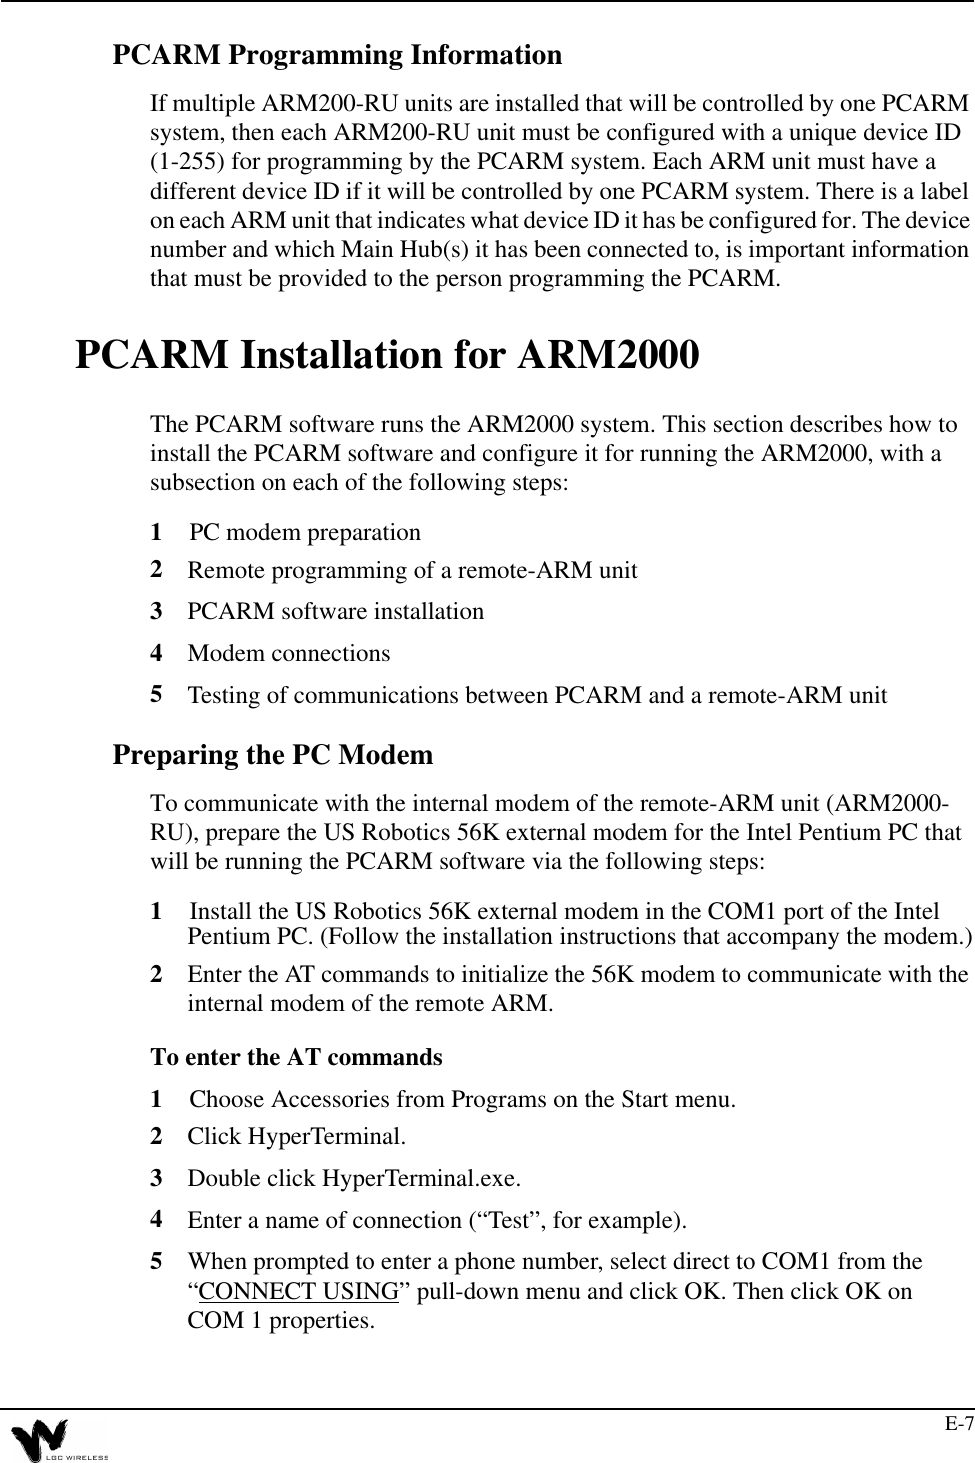 E-7PCARM Programming InformationIf multiple ARM200-RU units are installed that will be controlled by one PCARM system, then each ARM200-RU unit must be configured with a unique device ID (1-255) for programming by the PCARM system. Each ARM unit must have a different device ID if it will be controlled by one PCARM system. There is a label on each ARM unit that indicates what device ID it has be configured for. The device number and which Main Hub(s) it has been connected to, is important information that must be provided to the person programming the PCARM.PCARM Installation for ARM2000The PCARM software runs the ARM2000 system. This section describes how to install the PCARM software and configure it for running the ARM2000, with a subsection on each of the following steps:1PC modem preparation2Remote programming of a remote-ARM unit3PCARM software installation4Modem connections5Testing of communications between PCARM and a remote-ARM unitPreparing the PC ModemTo communicate with the internal modem of the remote-ARM unit (ARM2000-RU), prepare the US Robotics 56K external modem for the Intel Pentium PC that will be running the PCARM software via the following steps:1Install the US Robotics 56K external modem in the COM1 port of the Intel Pentium PC. (Follow the installation instructions that accompany the modem.)2Enter the AT commands to initialize the 56K modem to communicate with the internal modem of the remote ARM. To enter the AT commands1Choose Accessories from Programs on the Start menu.2Click HyperTerminal.3Double click HyperTerminal.exe.4Enter a name of connection (“Test”, for example).5When prompted to enter a phone number, select direct to COM1 from the “CONNECT USING” pull-down menu and click OK. Then click OK on COM 1 properties.